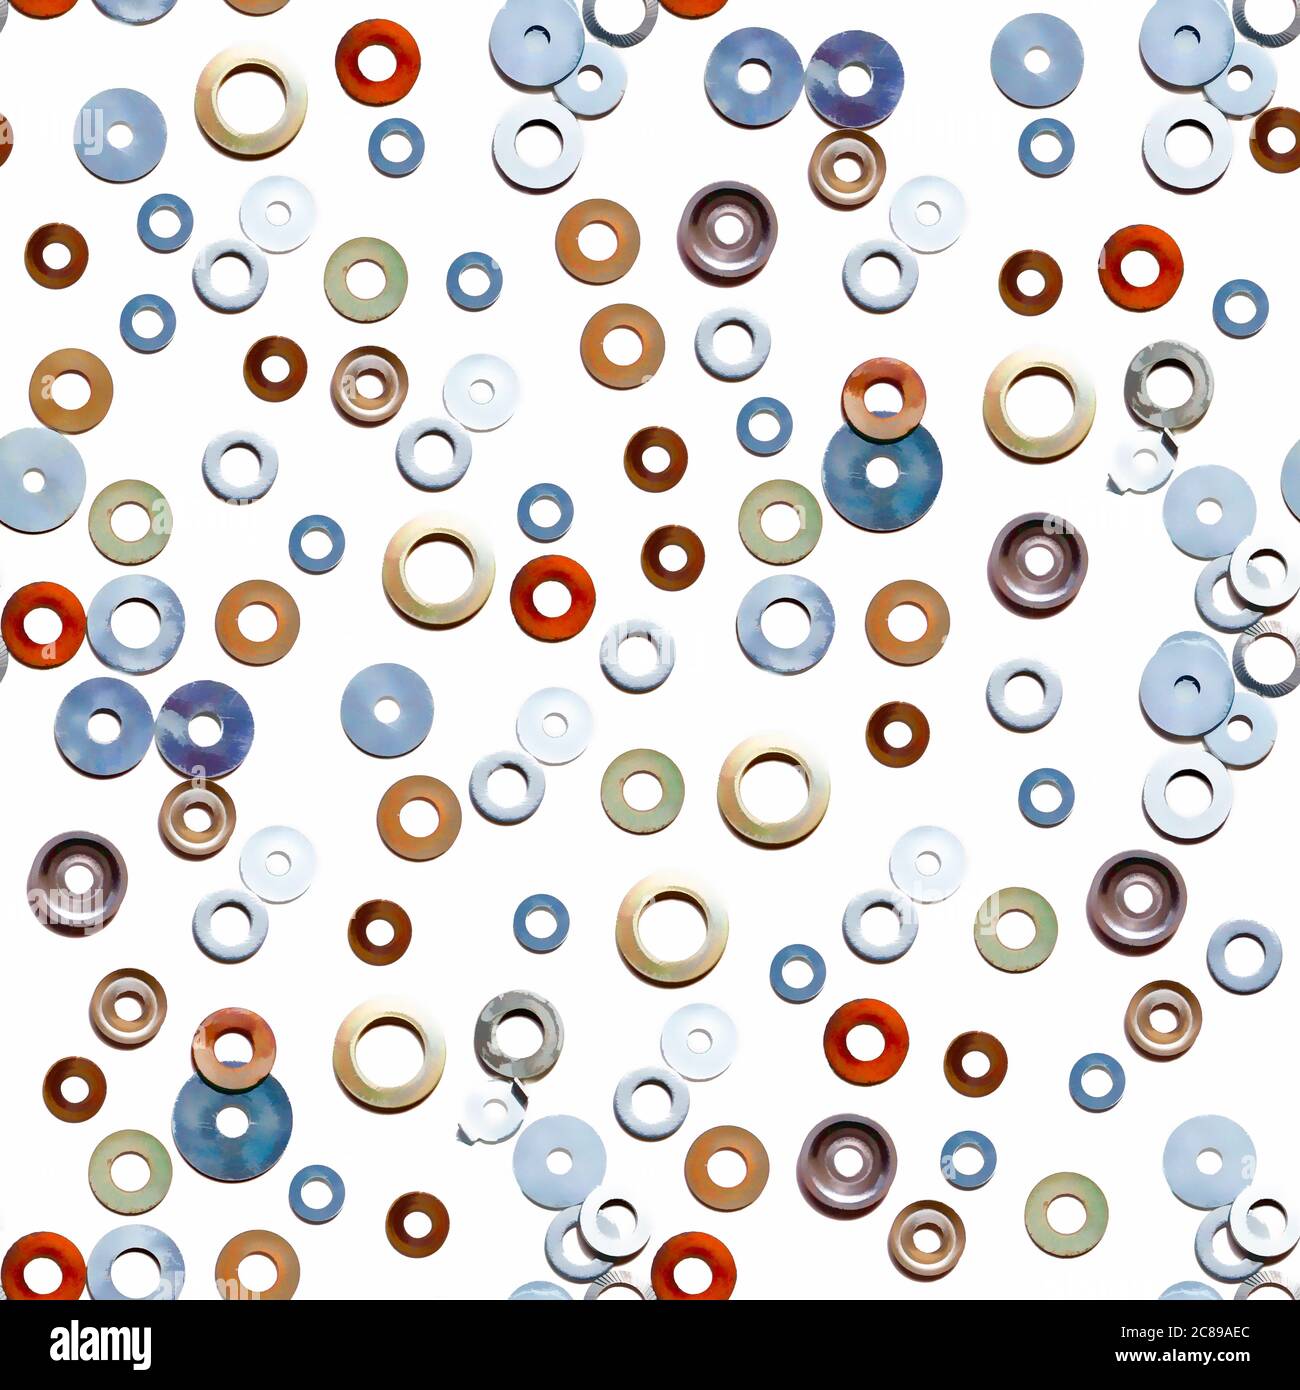 Seamlessly tileable image of colourful metal washers on a white background, suitable for wallpaper, wrapping paper or fabric prints Stock Photo